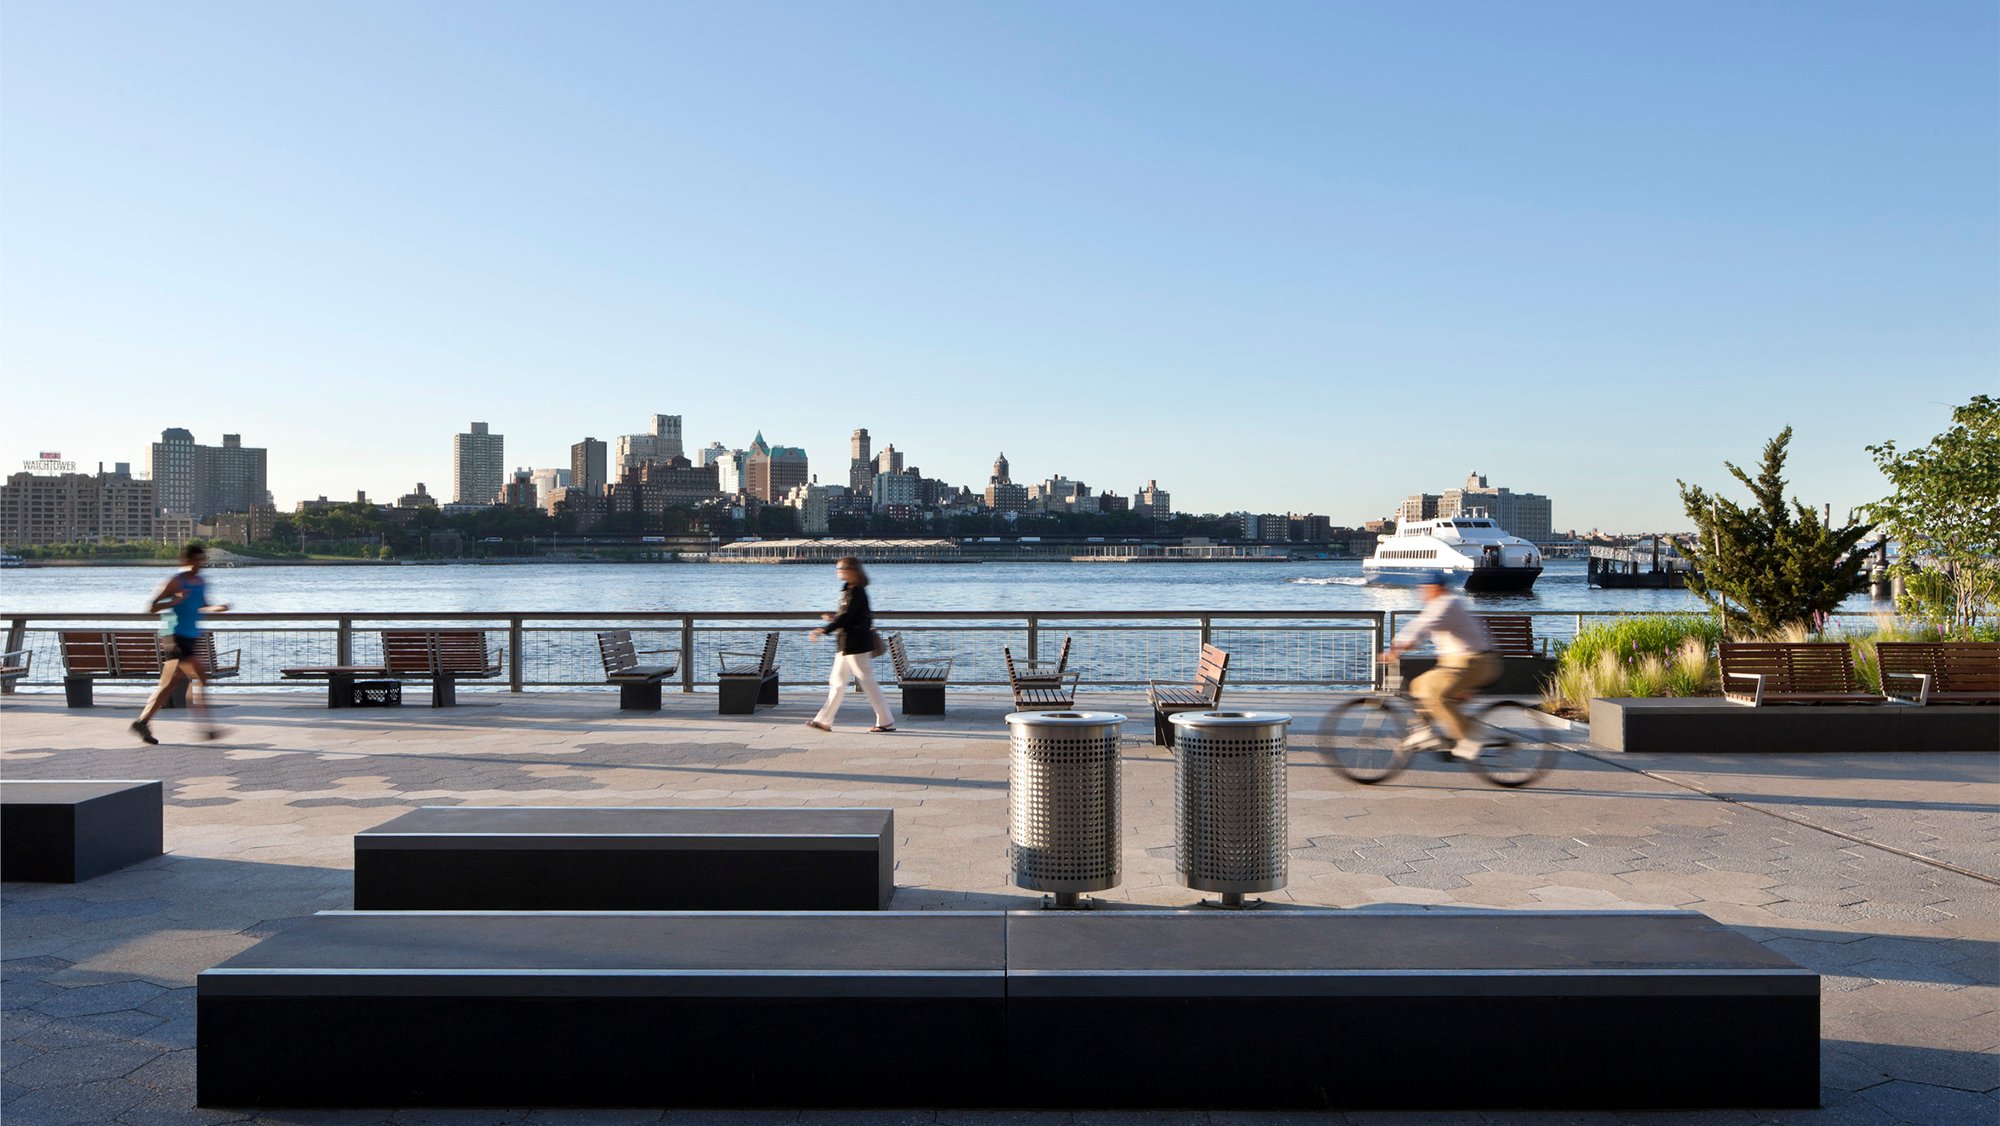 East River Waterfront Esplanade and Piers Project, New York, Ari Burling Photography